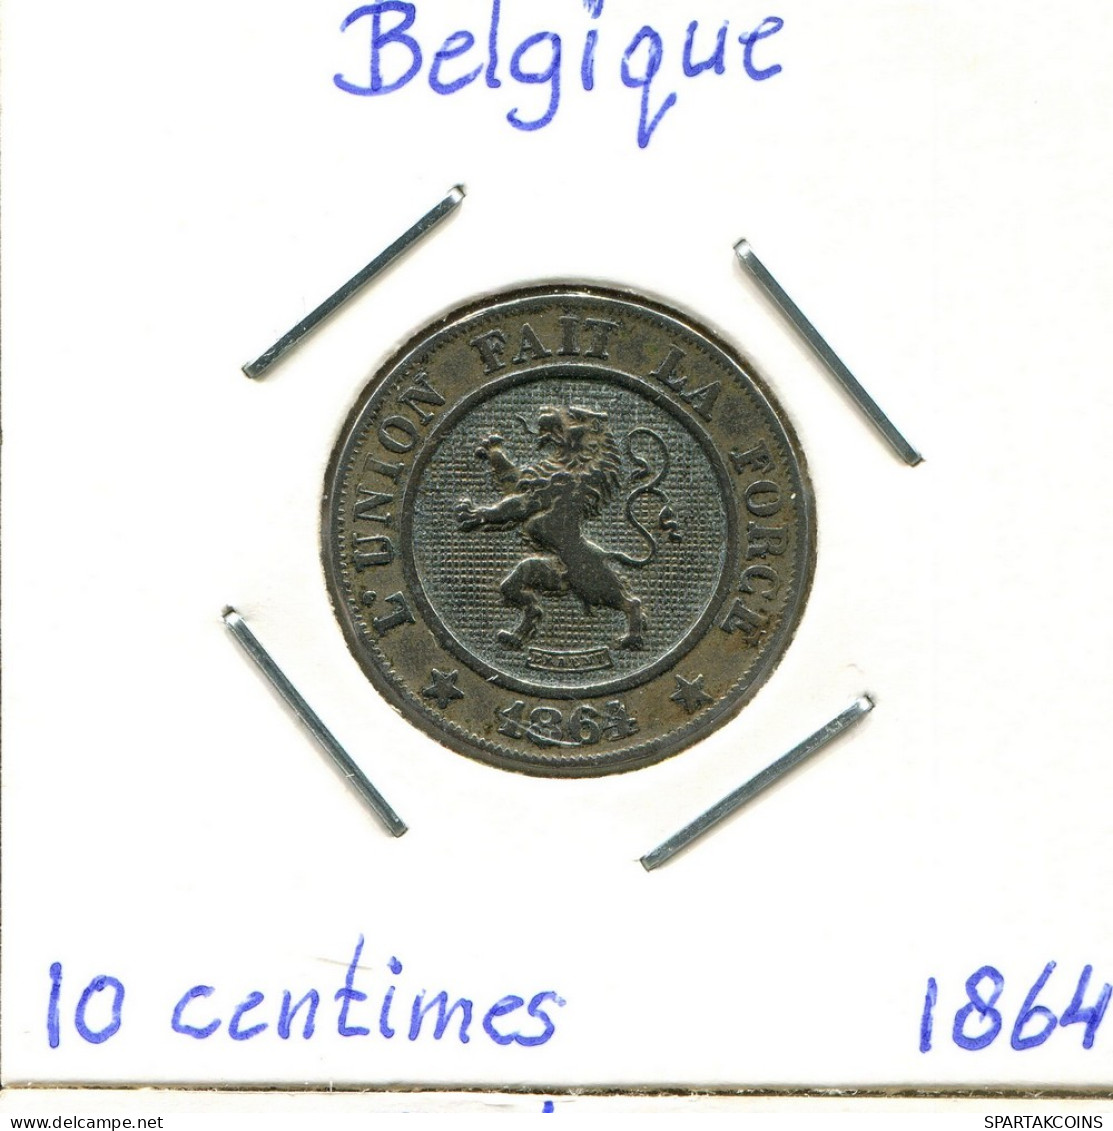 10 CENTIMES 1864 FRENCH Text BELGIUM Coin #BA270.U - 10 Centimes